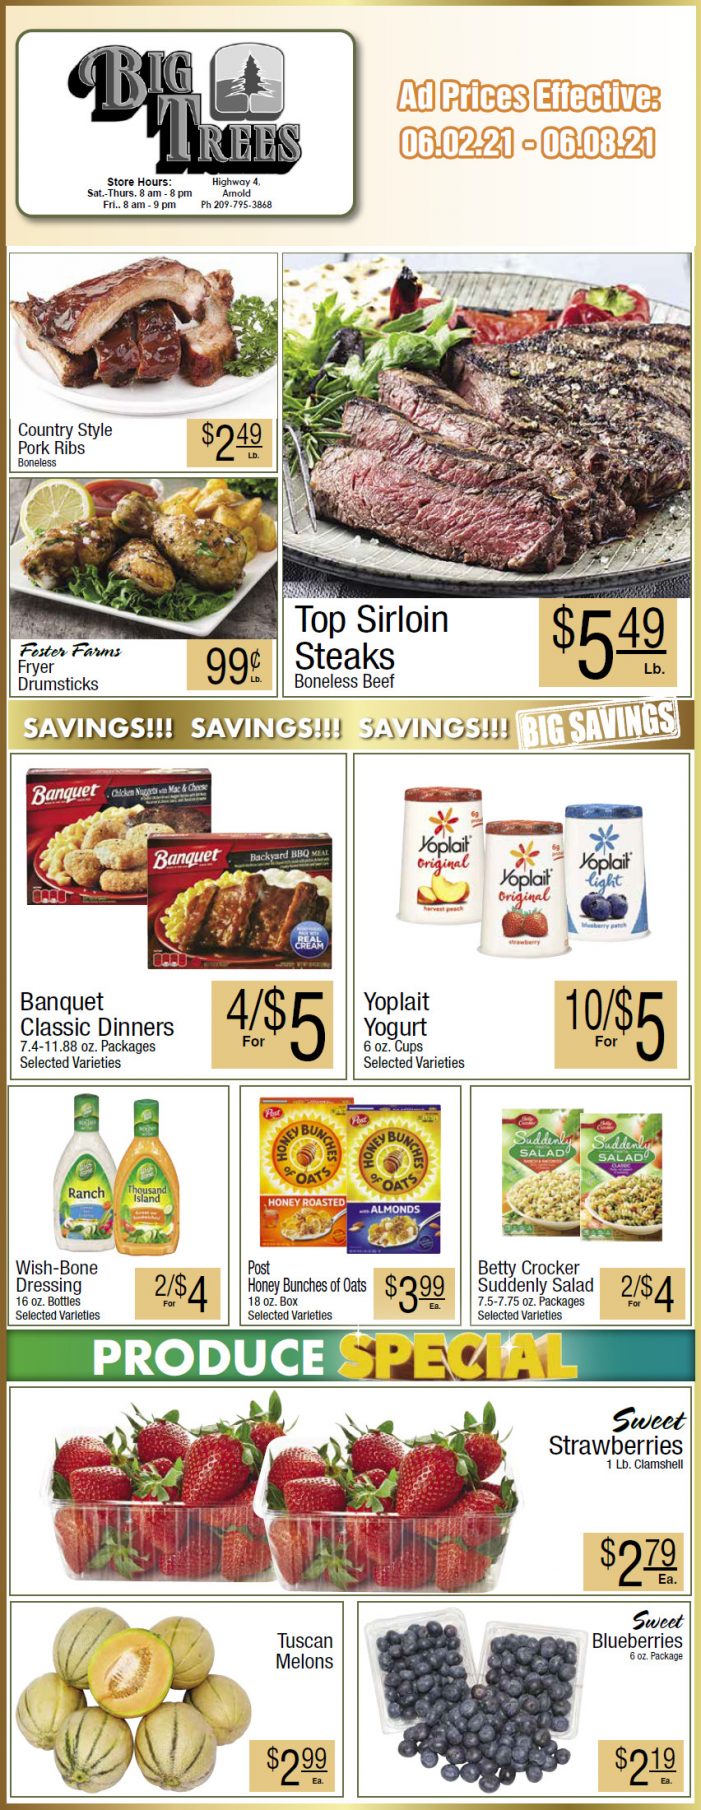 Big Trees Market Weekly Ad & Grocery Specials Through June 8th! Shop Local & Save!!